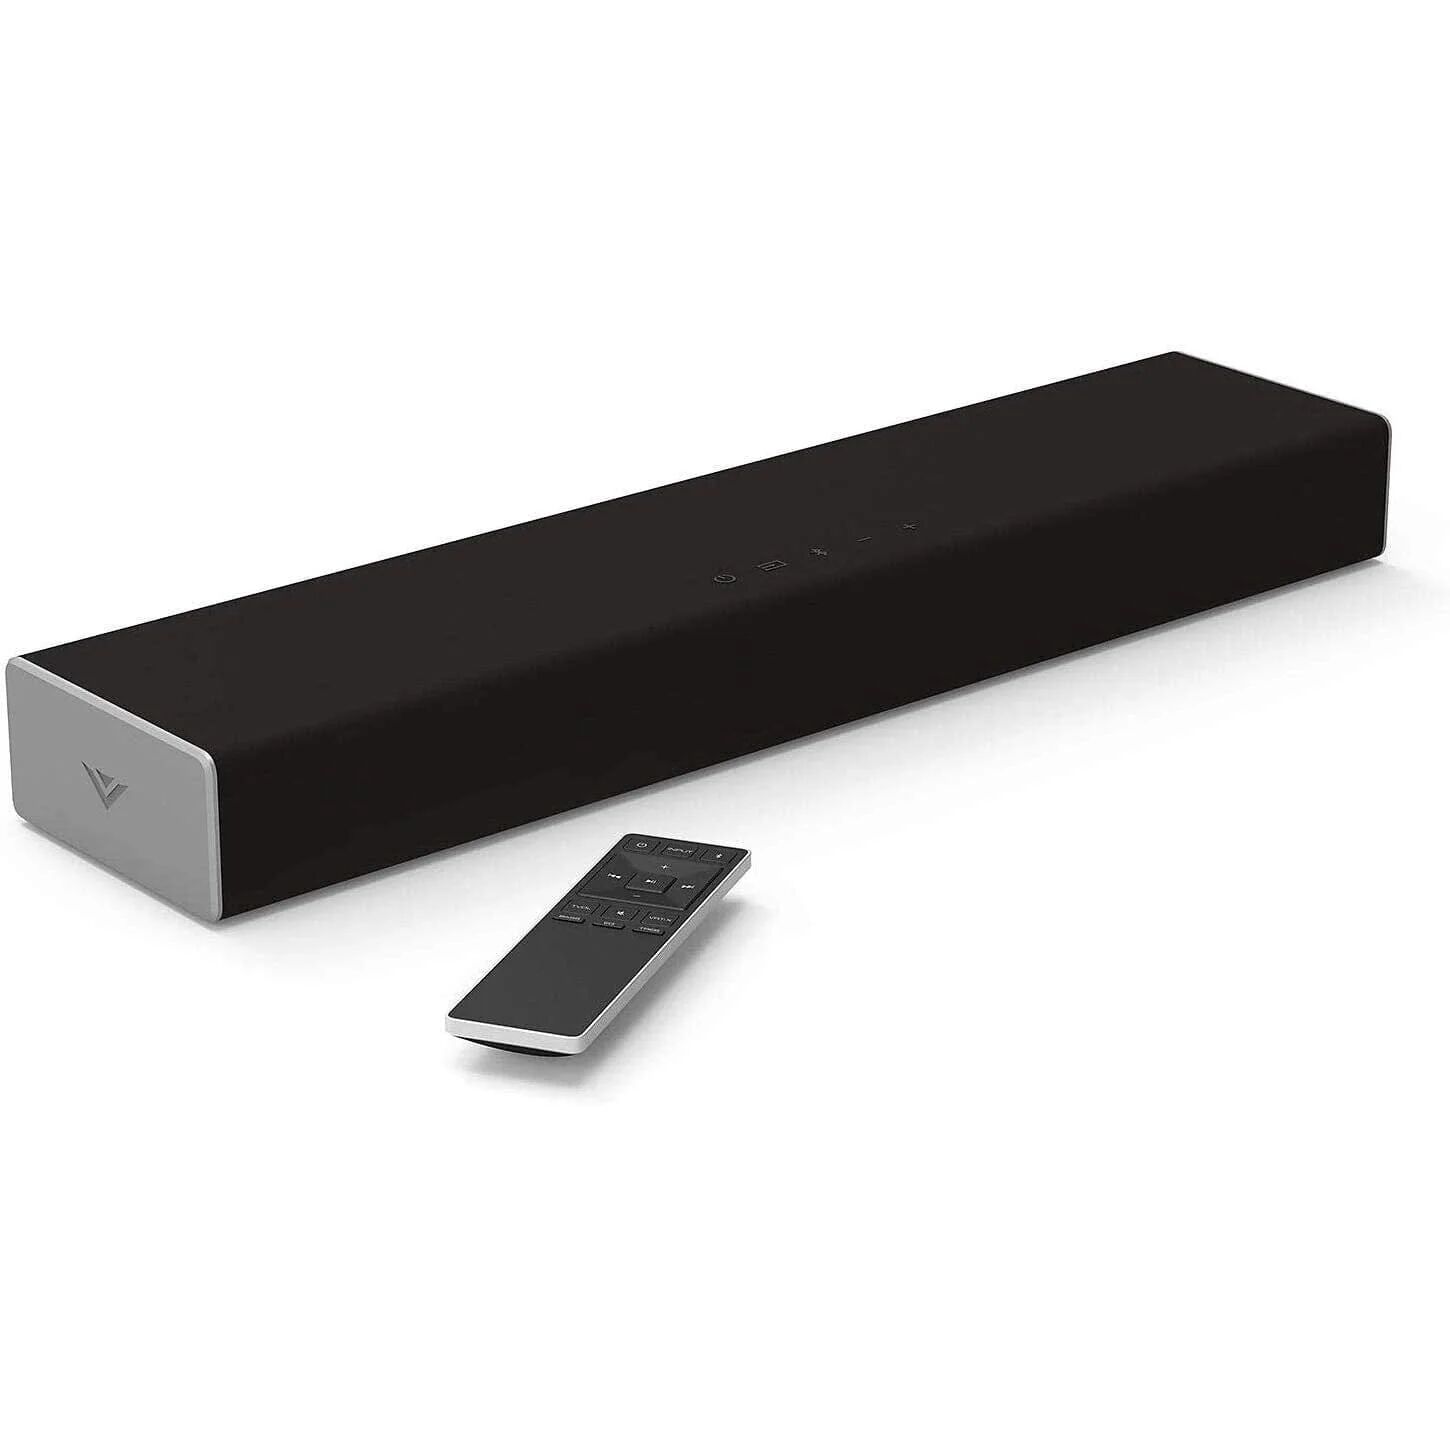 DailySale Vizio SB2020n-G6 20" 2.0 Home Theater Sound Bar with Integrated Deep Bass (Refurbished)